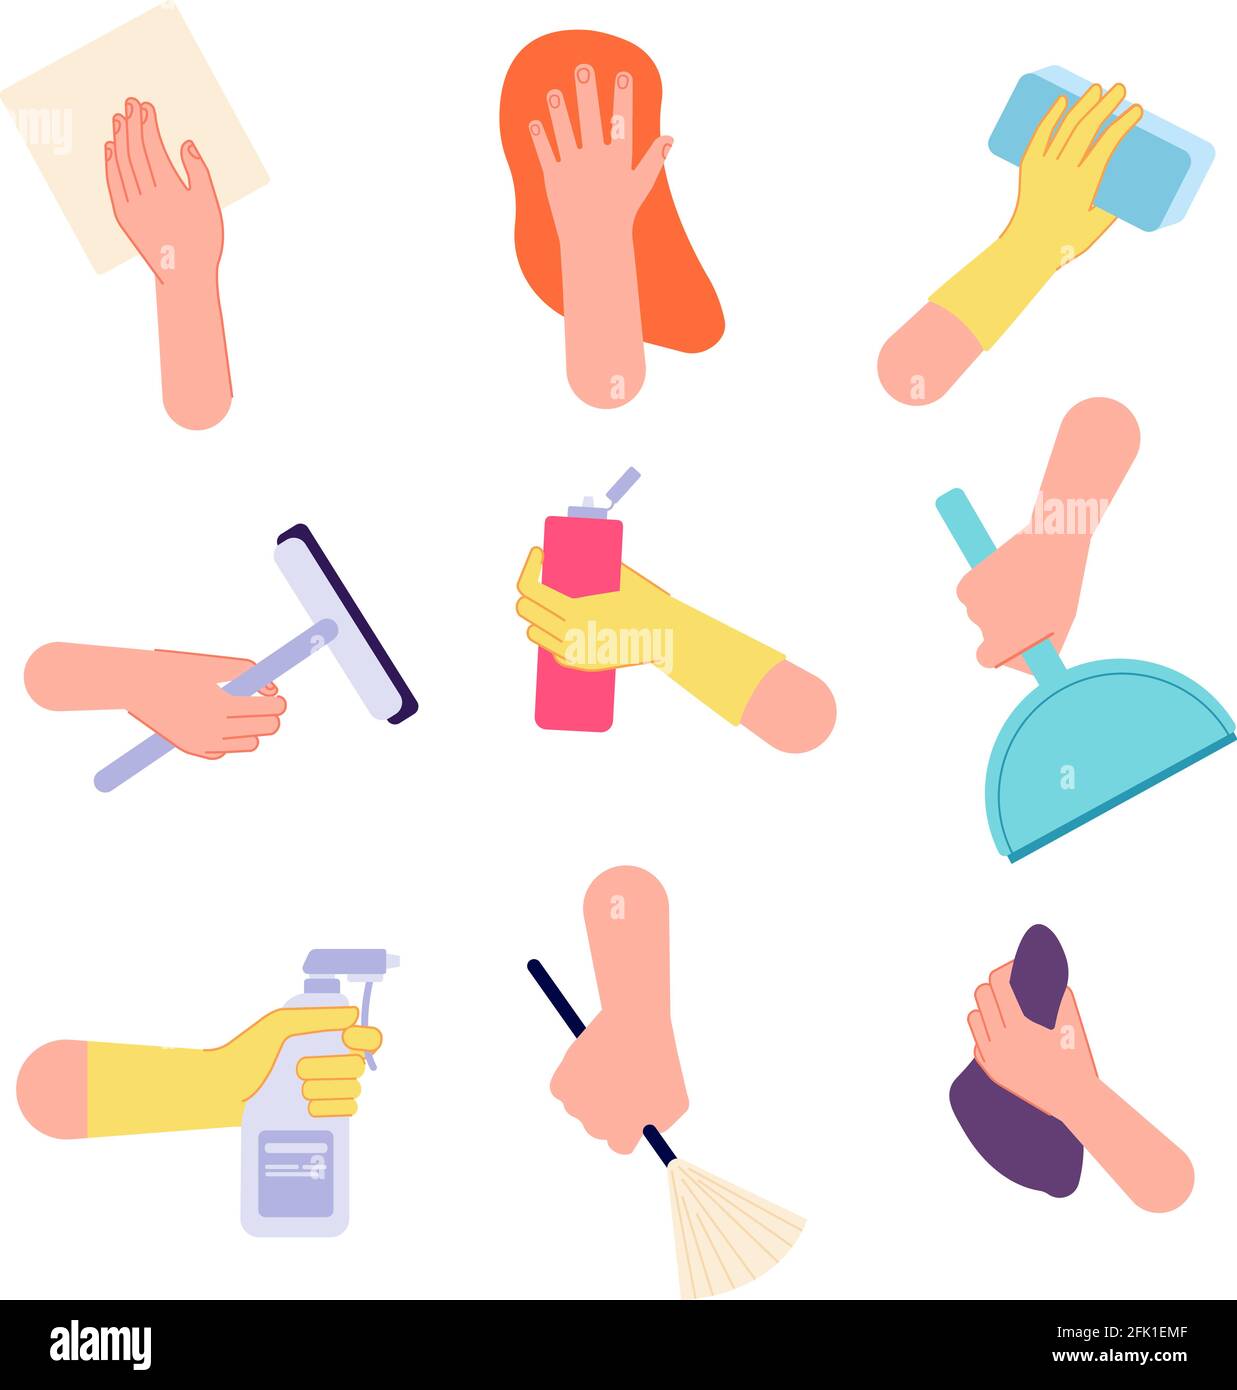 Hand cleaning. Hands watering, holding spray bottle brush sanitary wipes. Isolated housework icons with detergent tools vector illustration Stock Vector